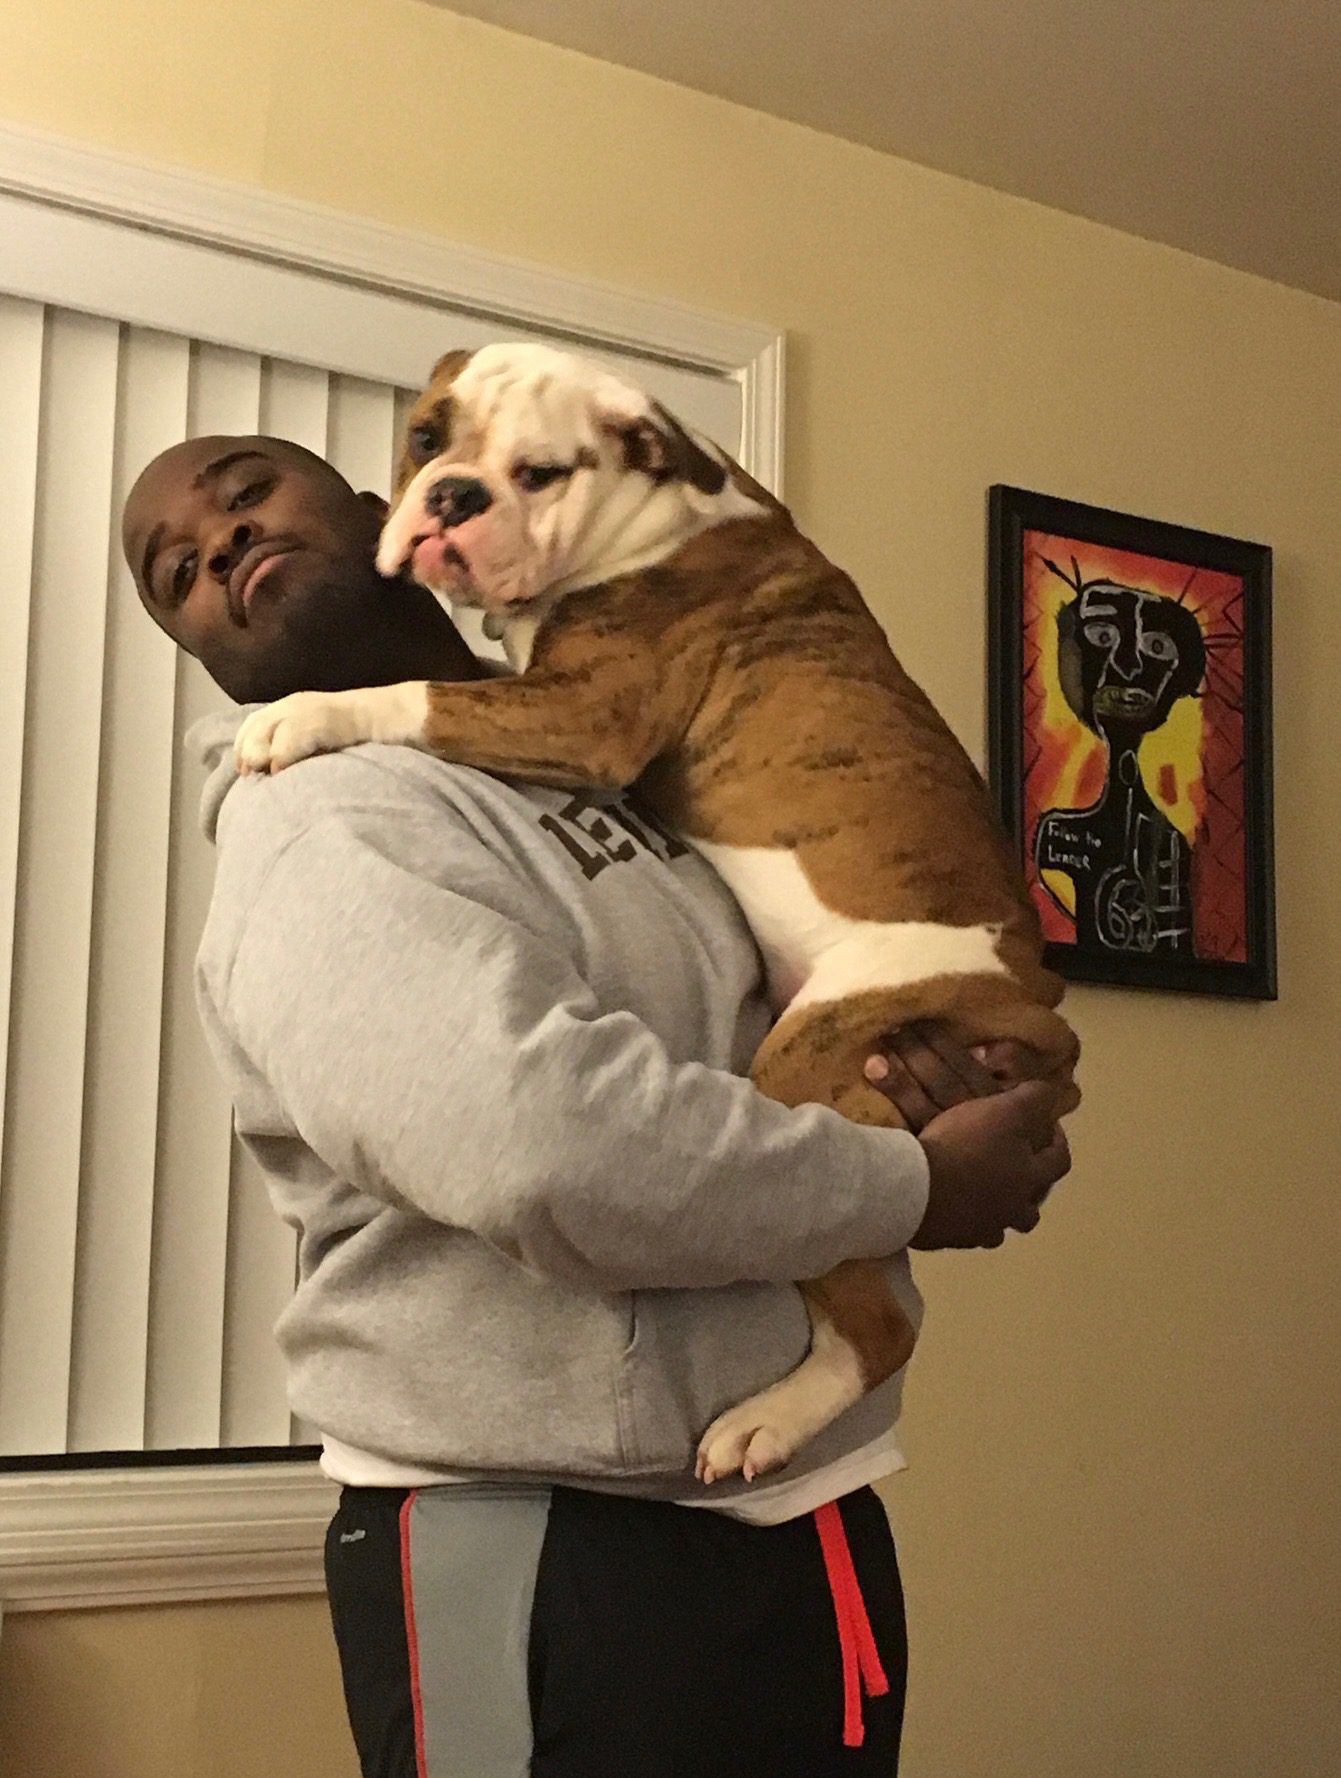 Photo shows Principal Jonas Cleaves standing and holding his big bulldog on his chest. The dog is hugging him. He is inside a house with a piece of art on the wall behind him.